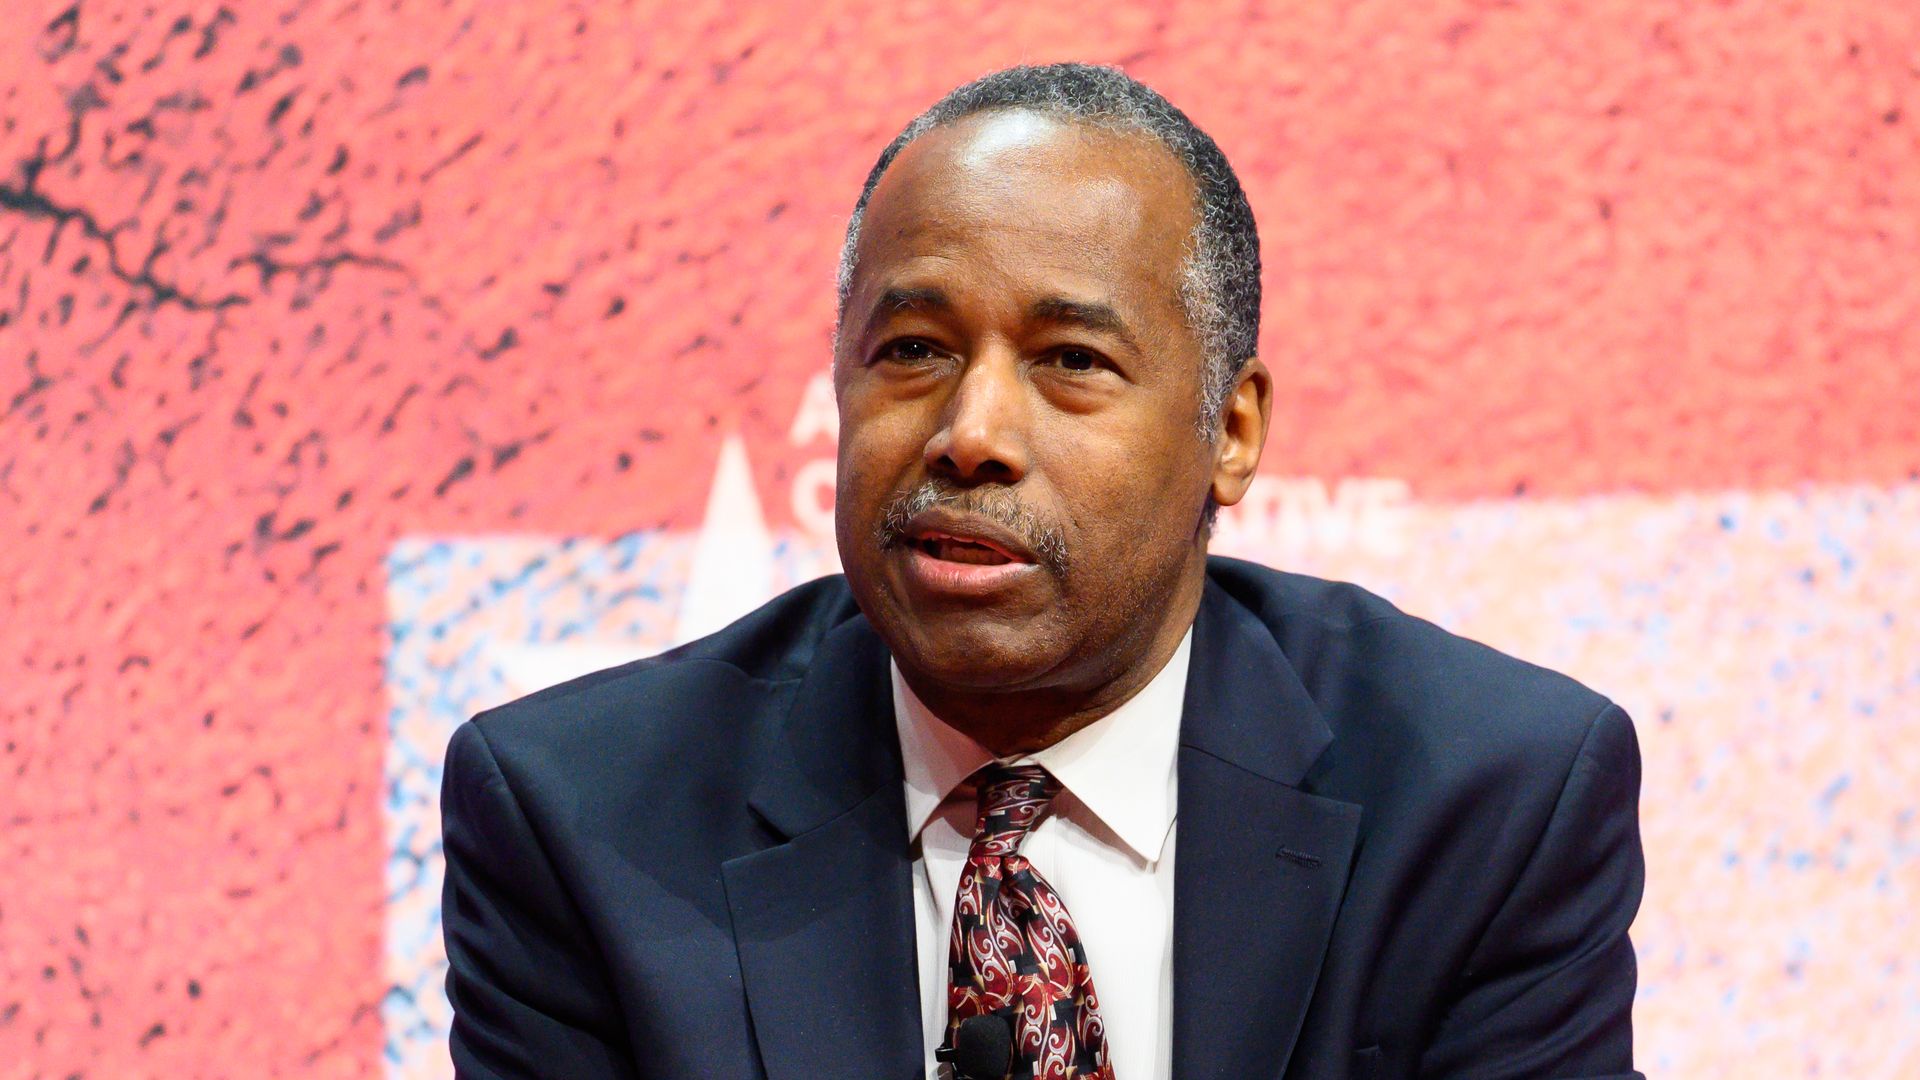 Ben Carson says he will "certainly" finish out this term.